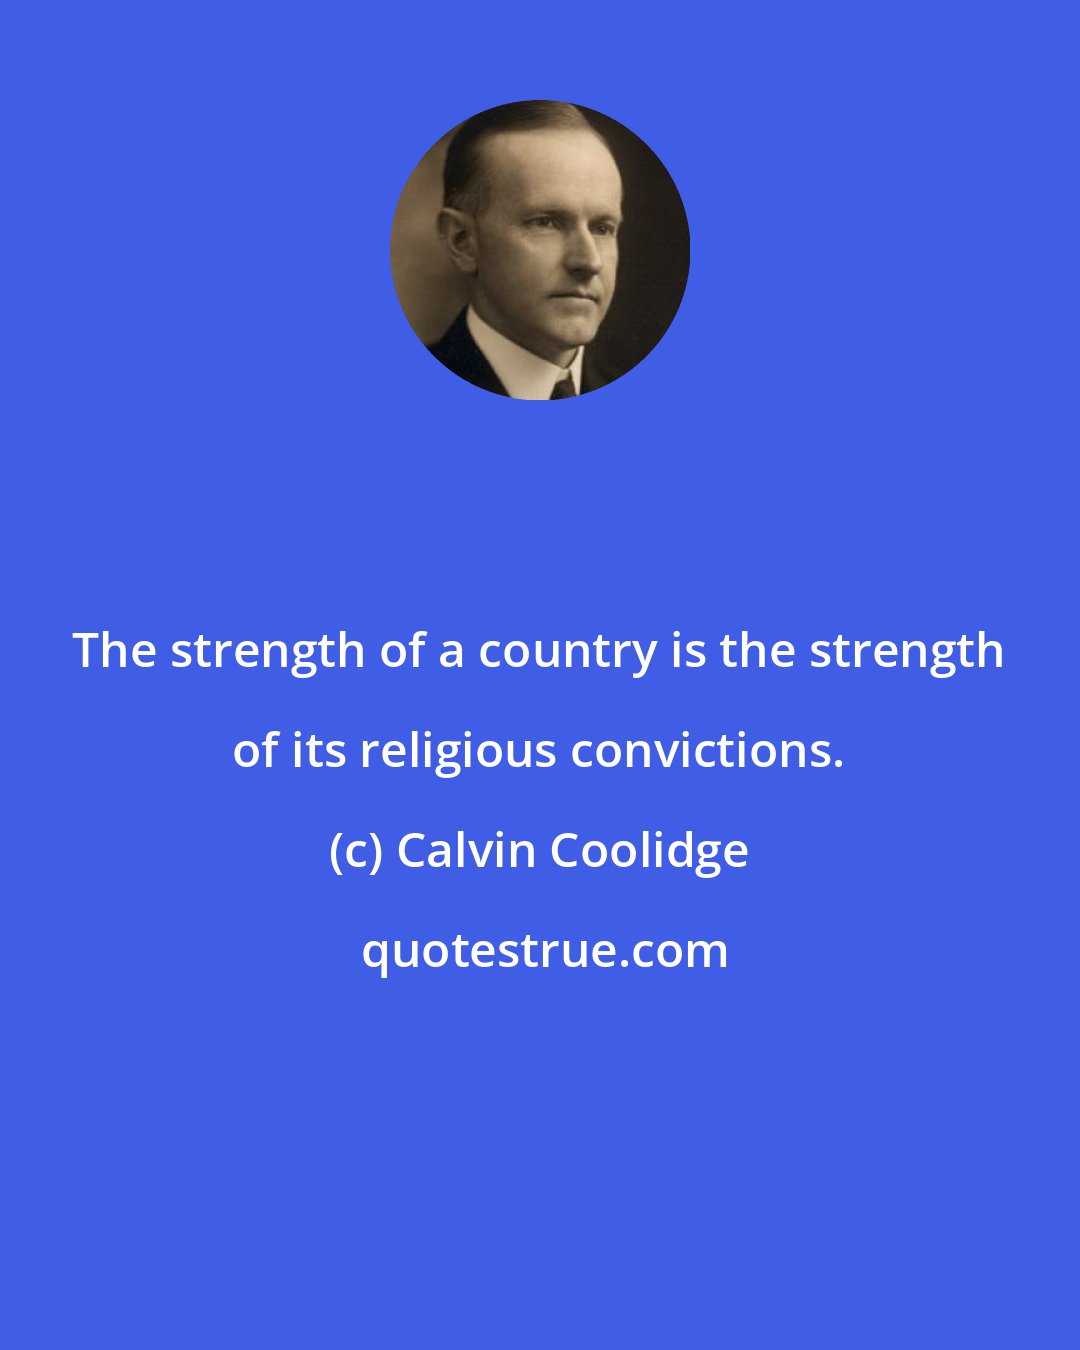 Calvin Coolidge: The strength of a country is the strength of its religious convictions.